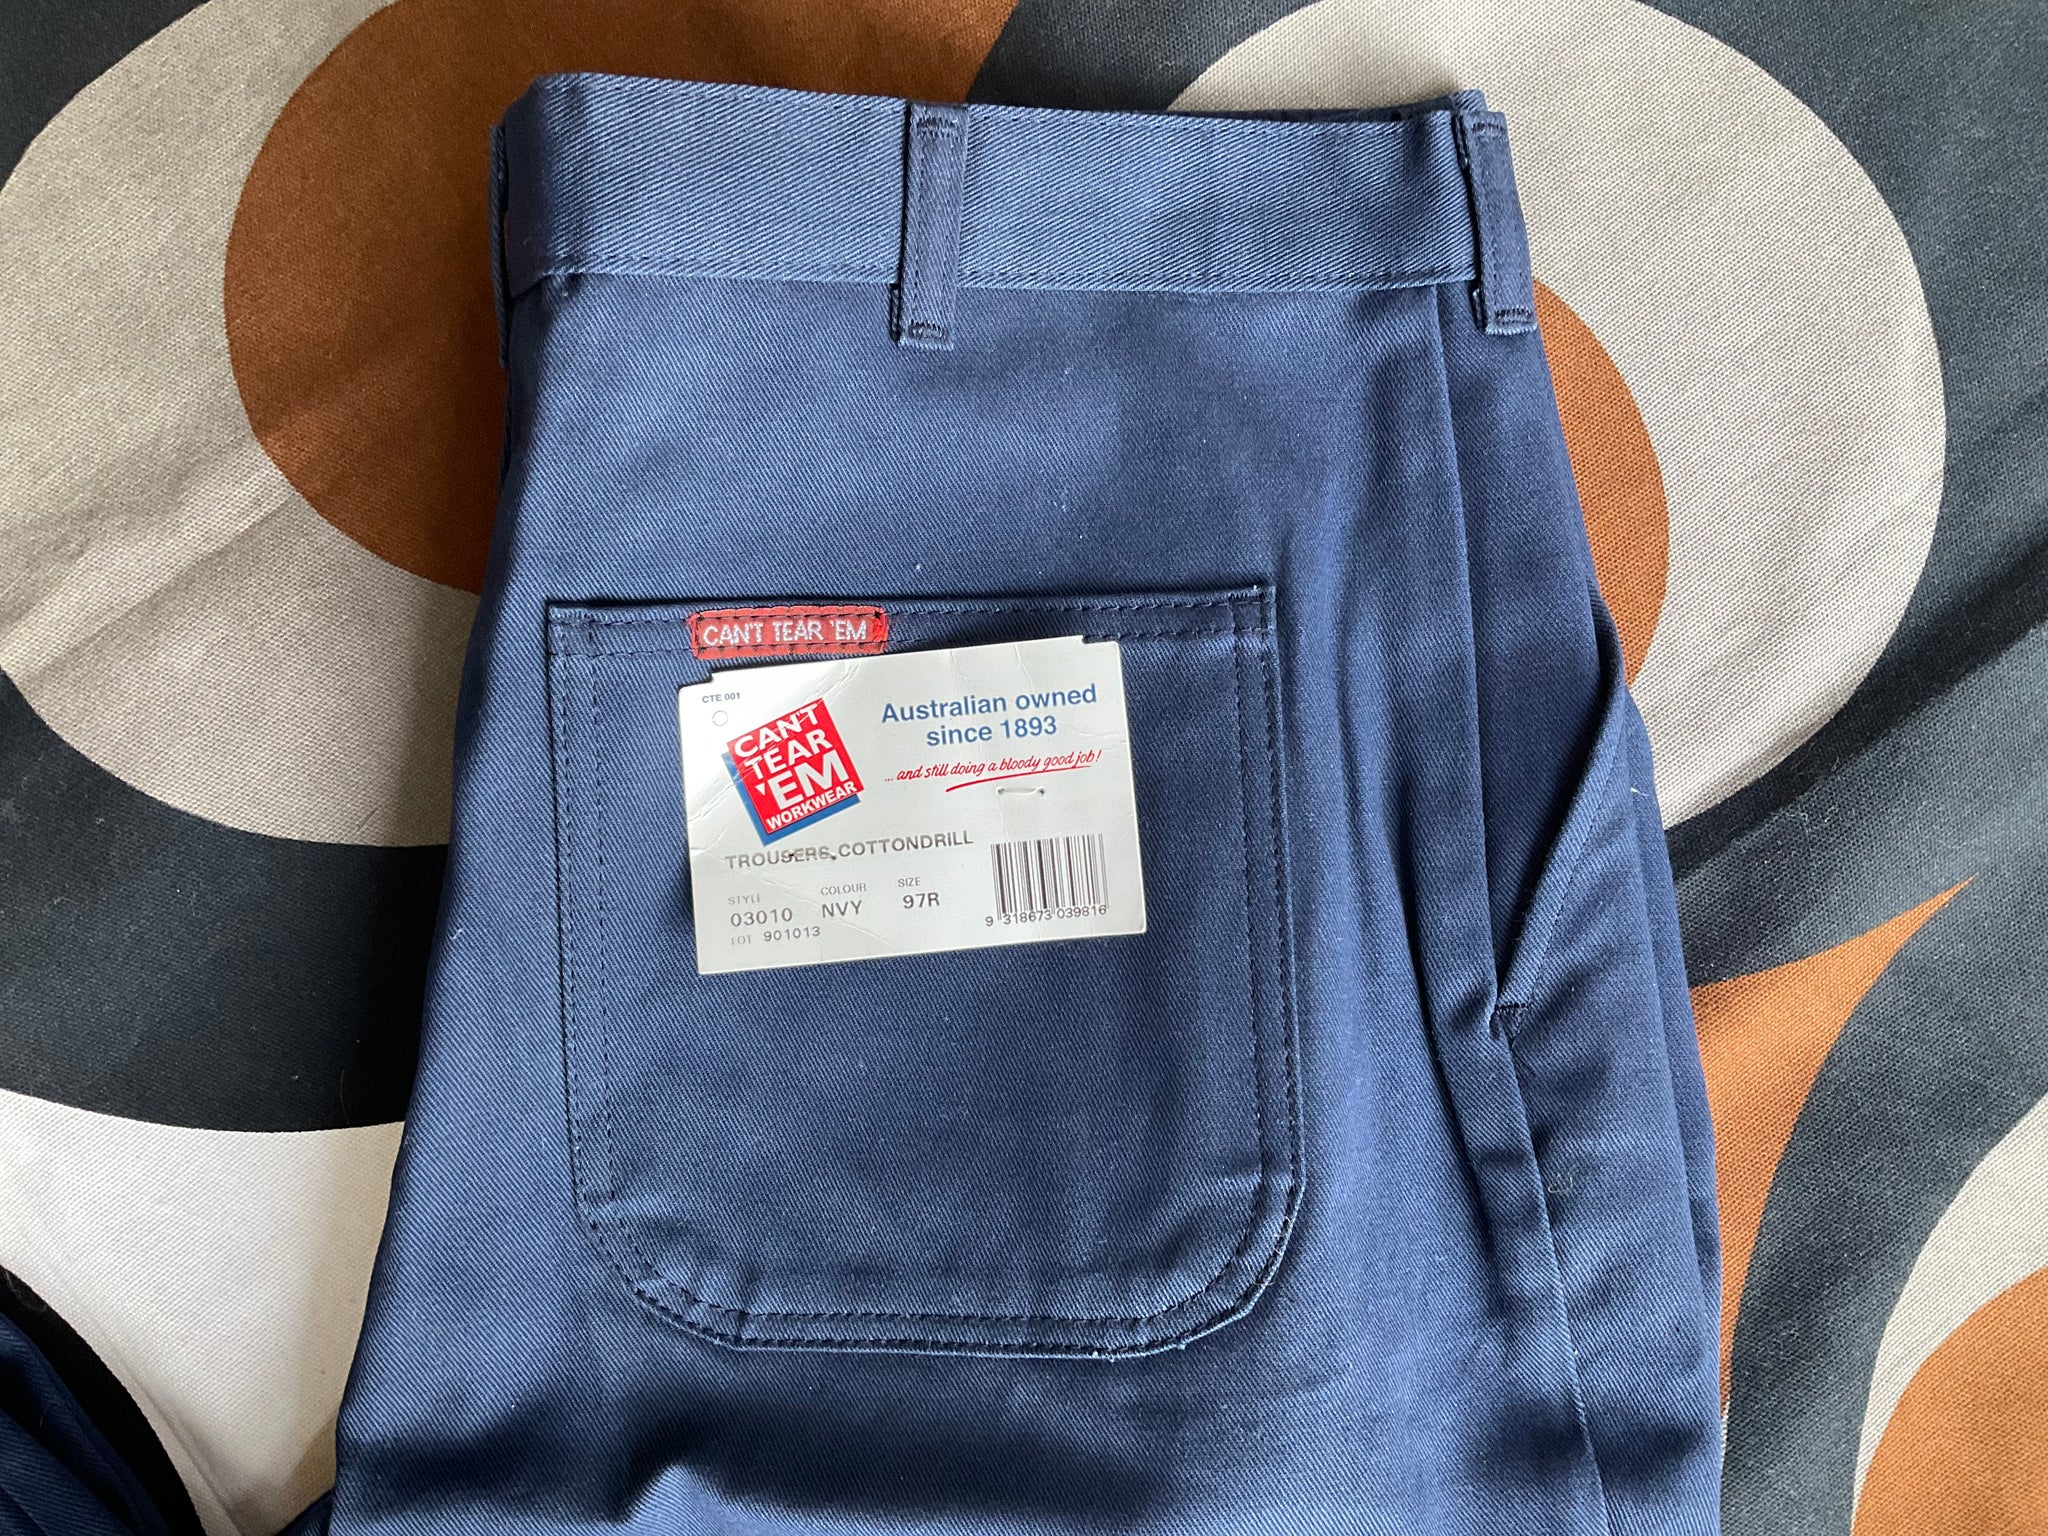 New Old Stock Can’t Tear ‘Em workwear trousers, 36” – Mr Smart Melbourne